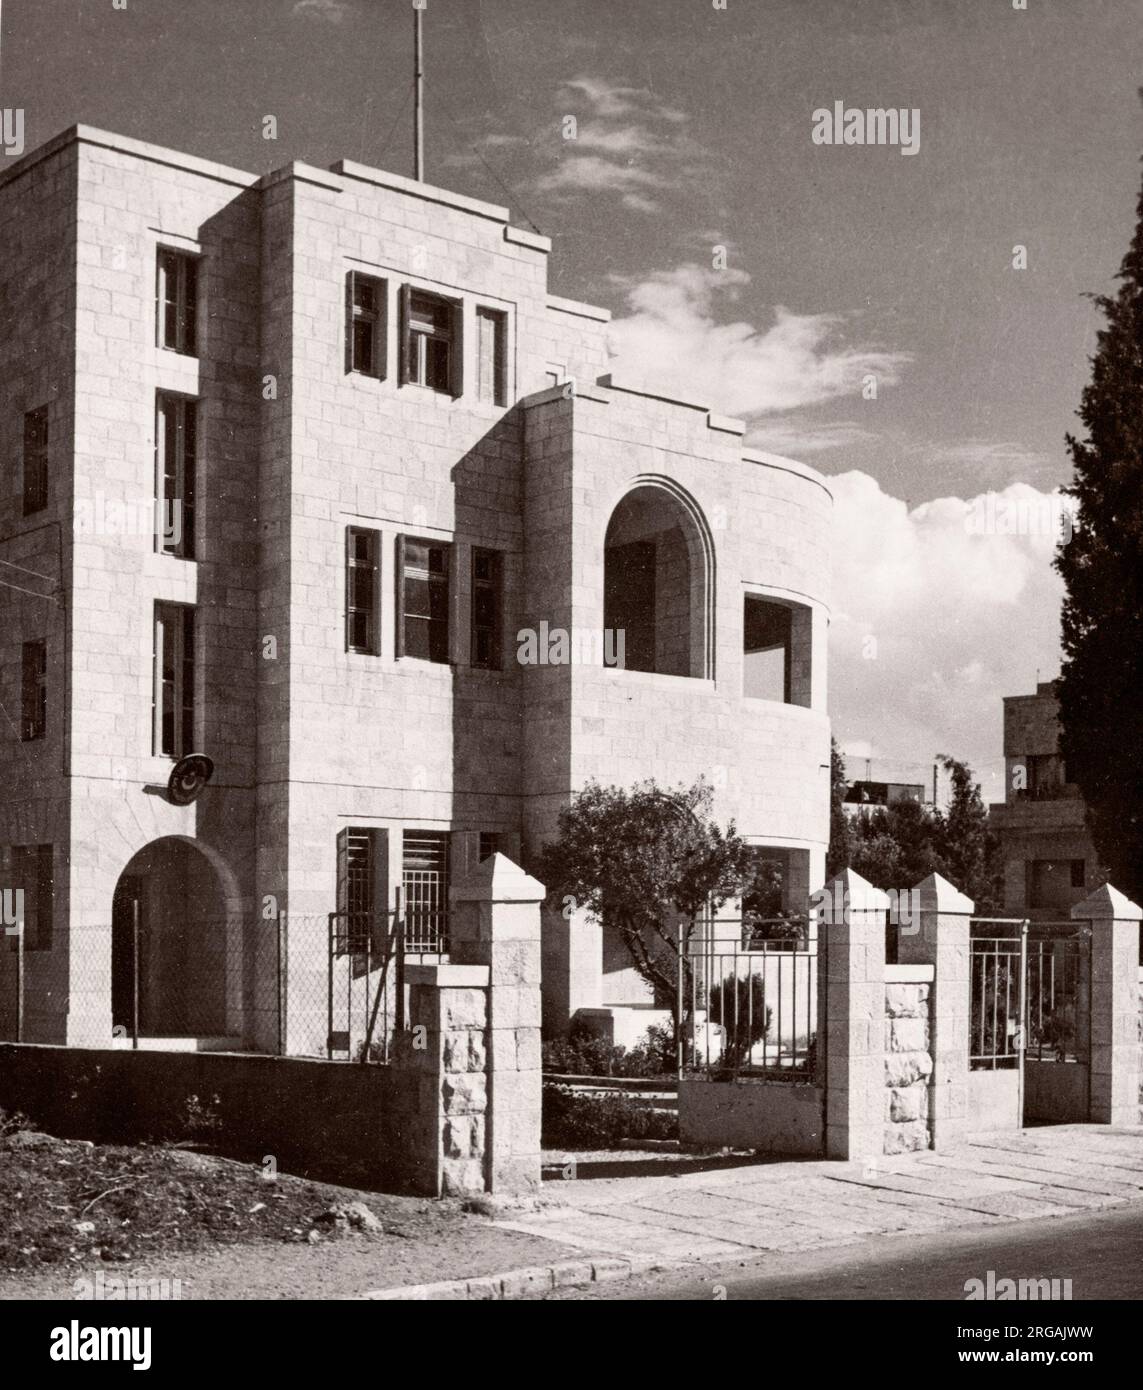 1943 - Jerusalem, Palestine (Israel) - modern architecture, new buildings Photograph by a British army recruitment officer stationed in East Africa and the Middle East during World War II Stock Photo